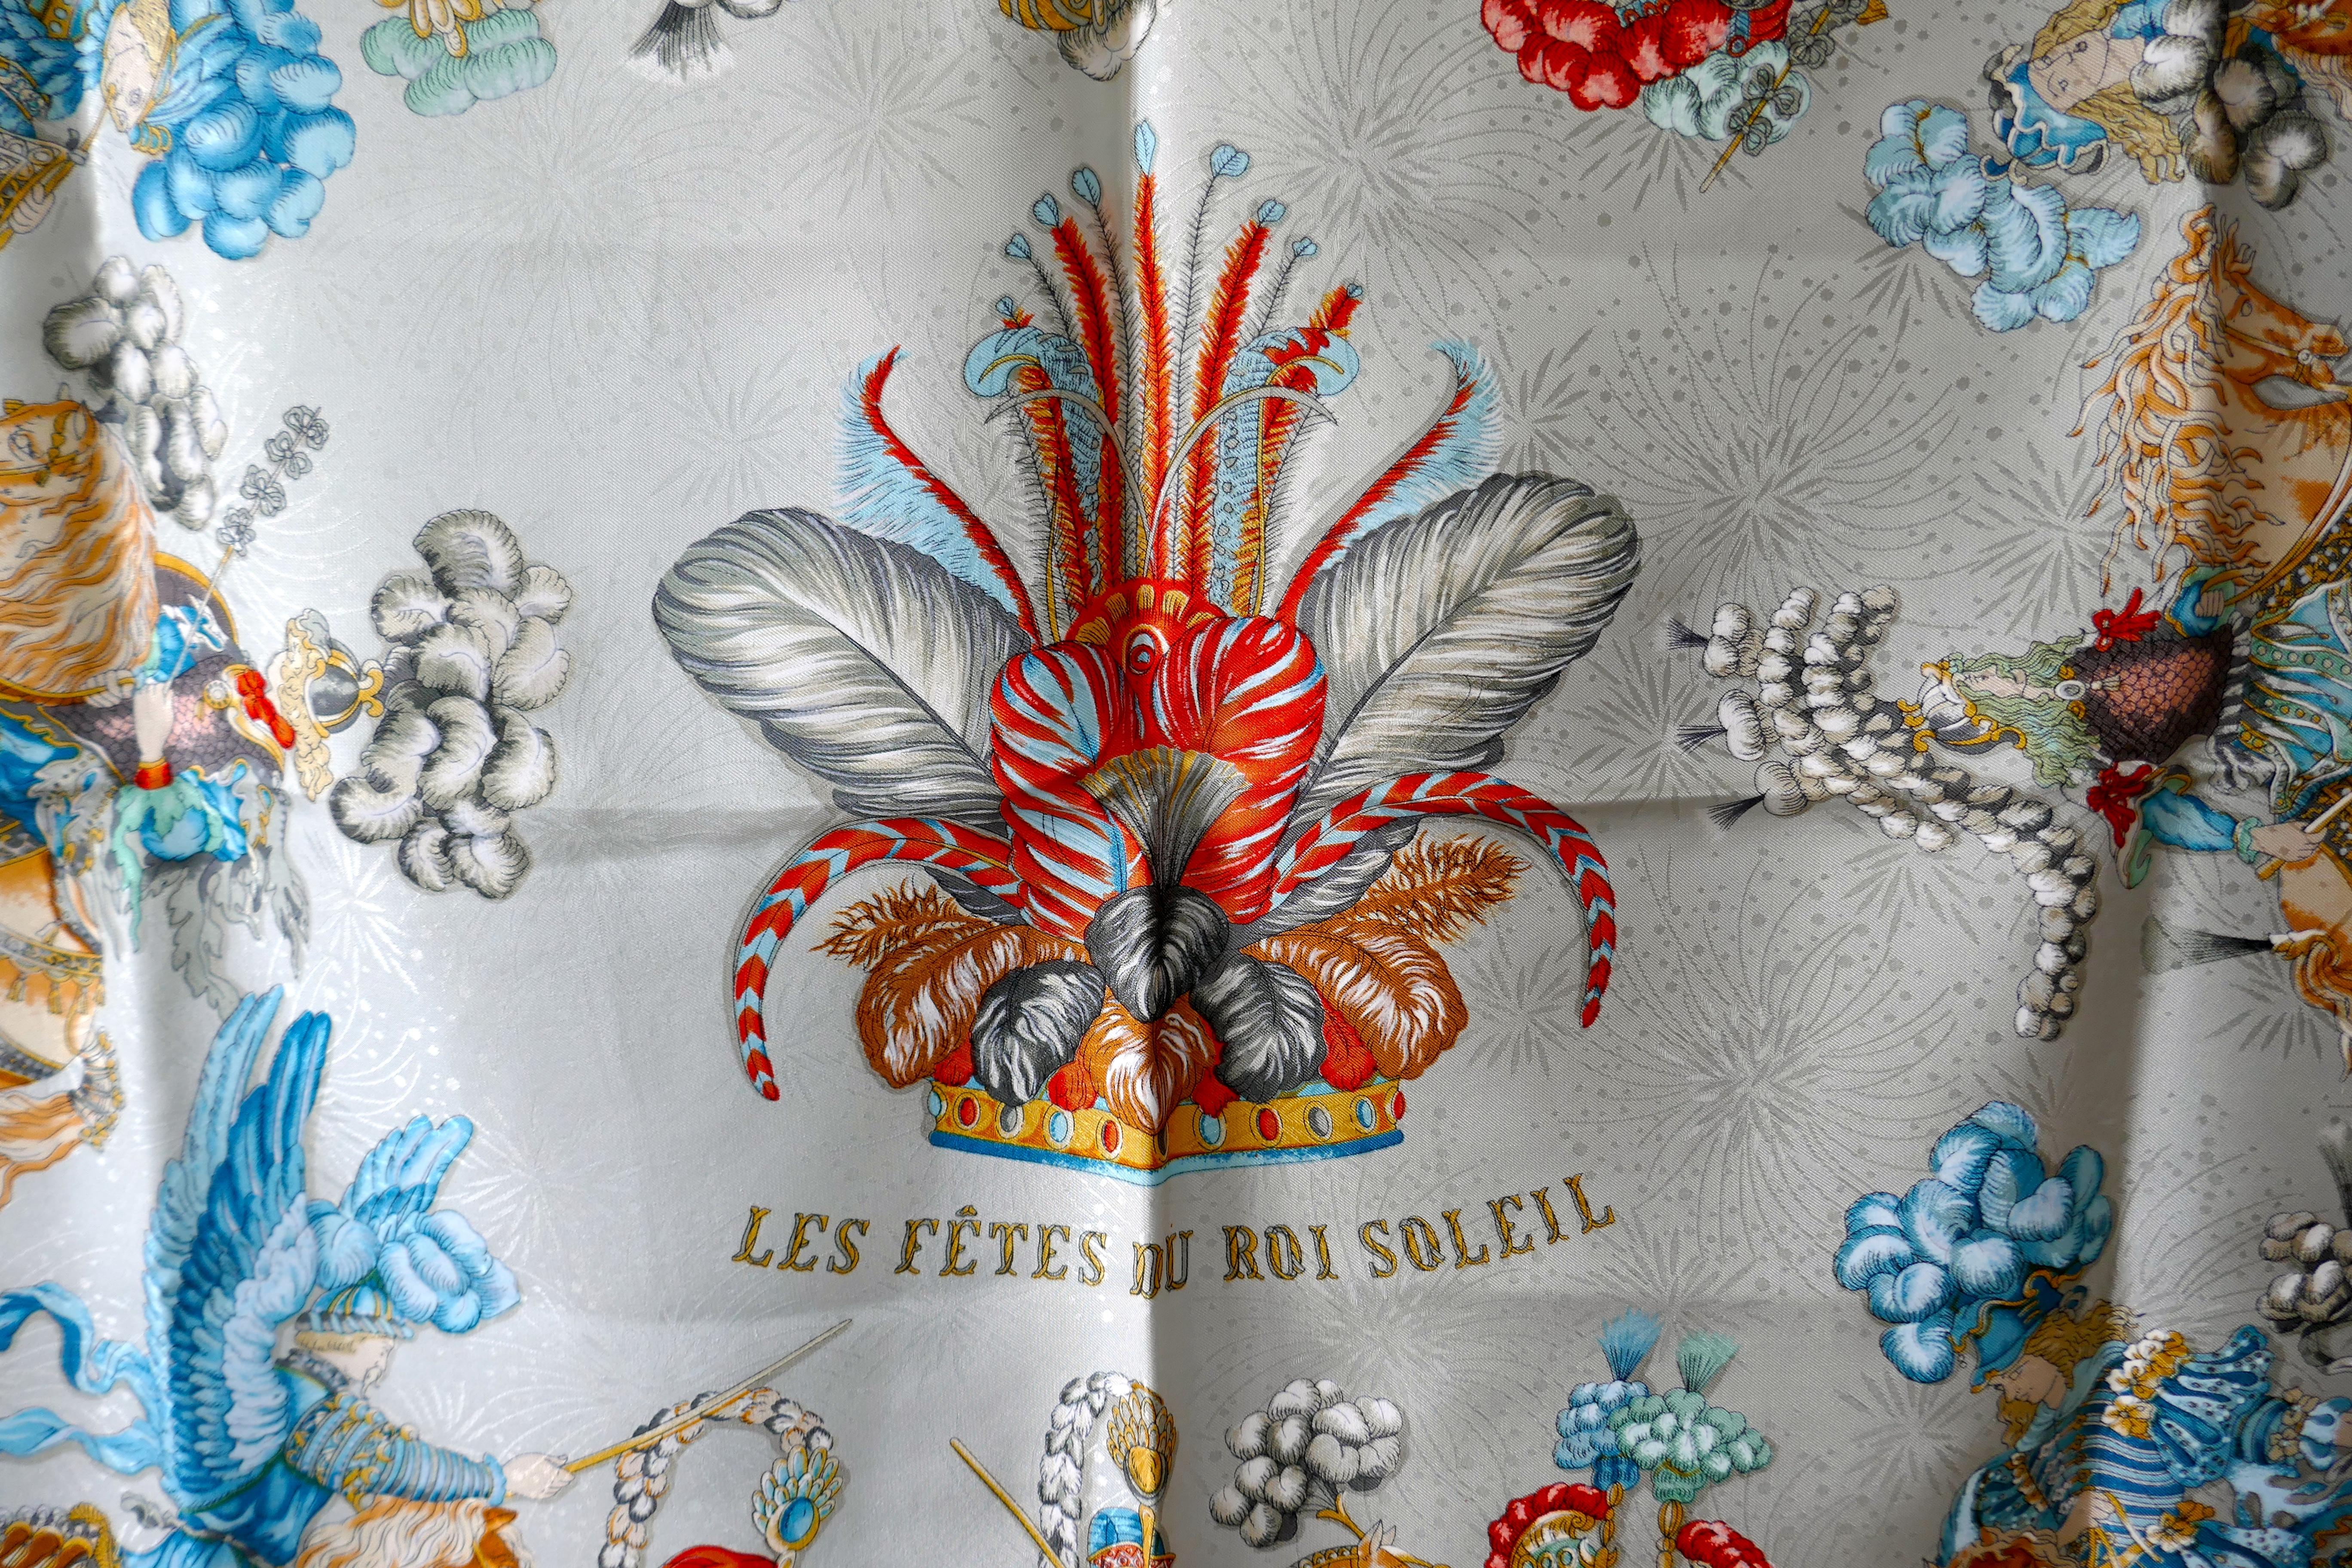 Hermès Scarf, in 100% Silk, Michel Duchene design “Les Fetes du Roi Soleil” 

In unworn good condition,  
Logo and HERMÈs-Paris
The scarf is bright with finely detailed Horse Pictures
The Scarf is 34” x 34” 
100% Silk with hand rolled hems

F48
